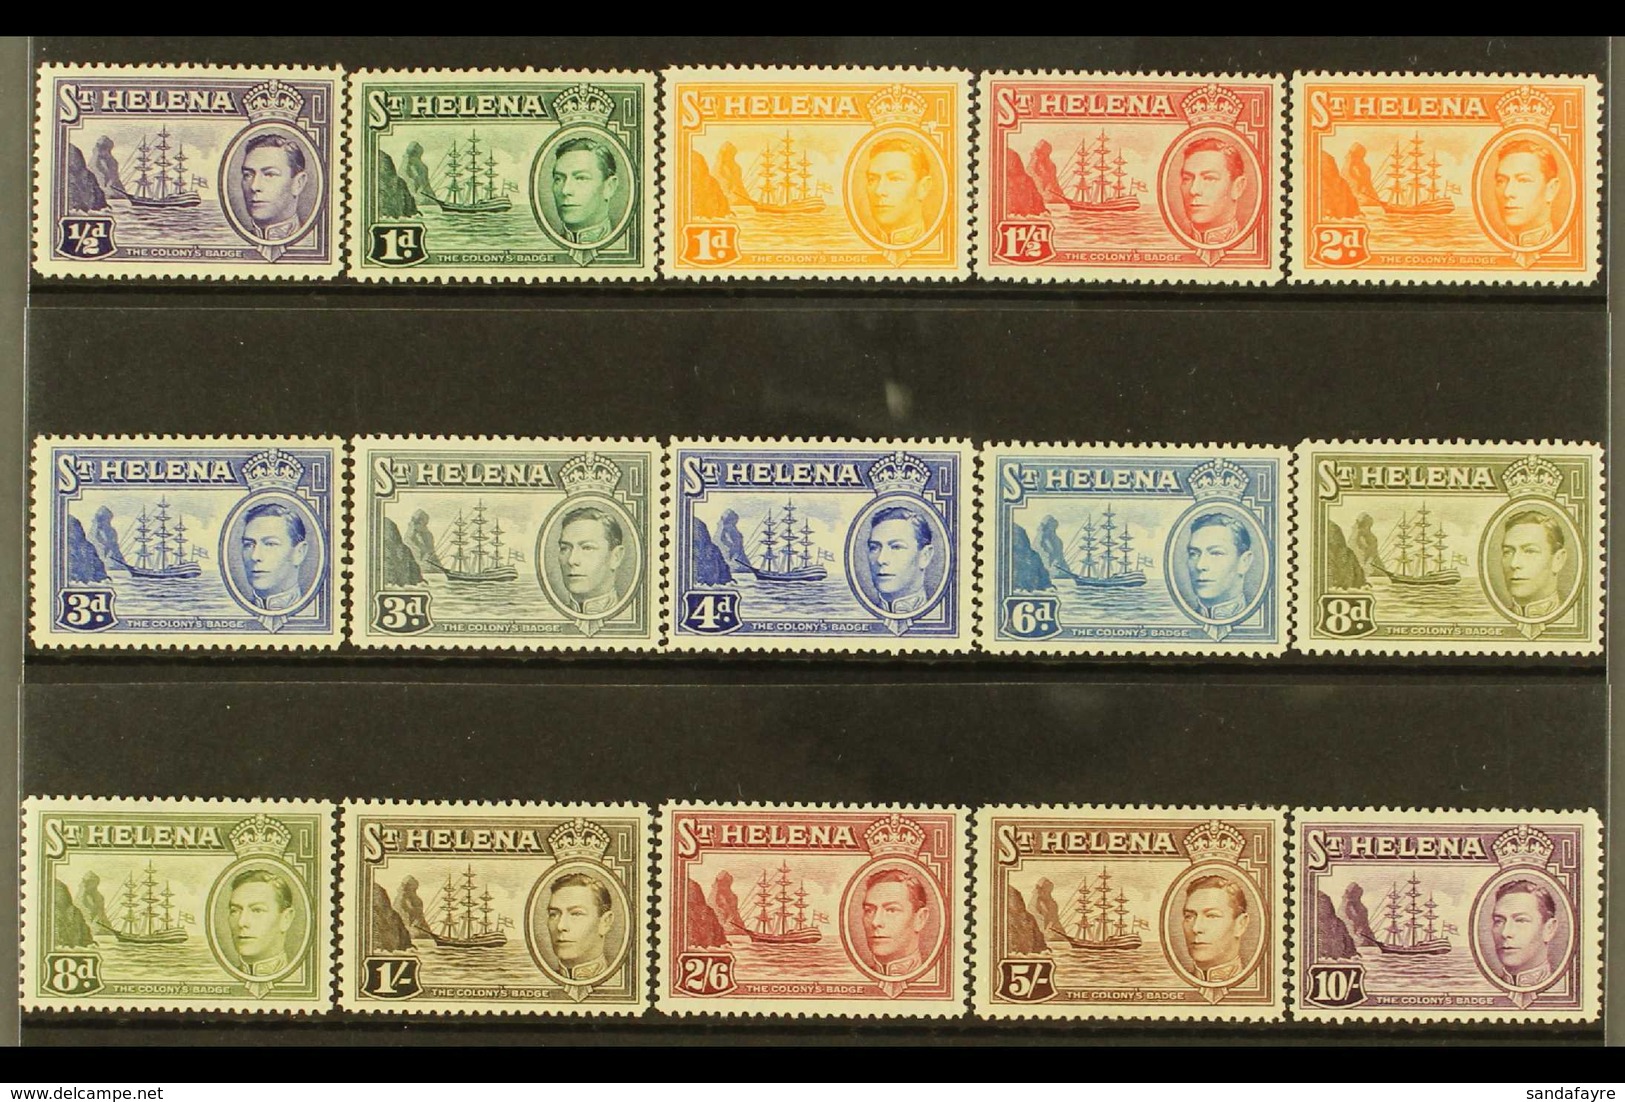 1938-44 Badge - Ship Complete Set Inc Both 8d Shades, SG 131/40 & 136b, Very Fine Mint, Fresh. (15 Stamps) For More Imag - Saint Helena Island